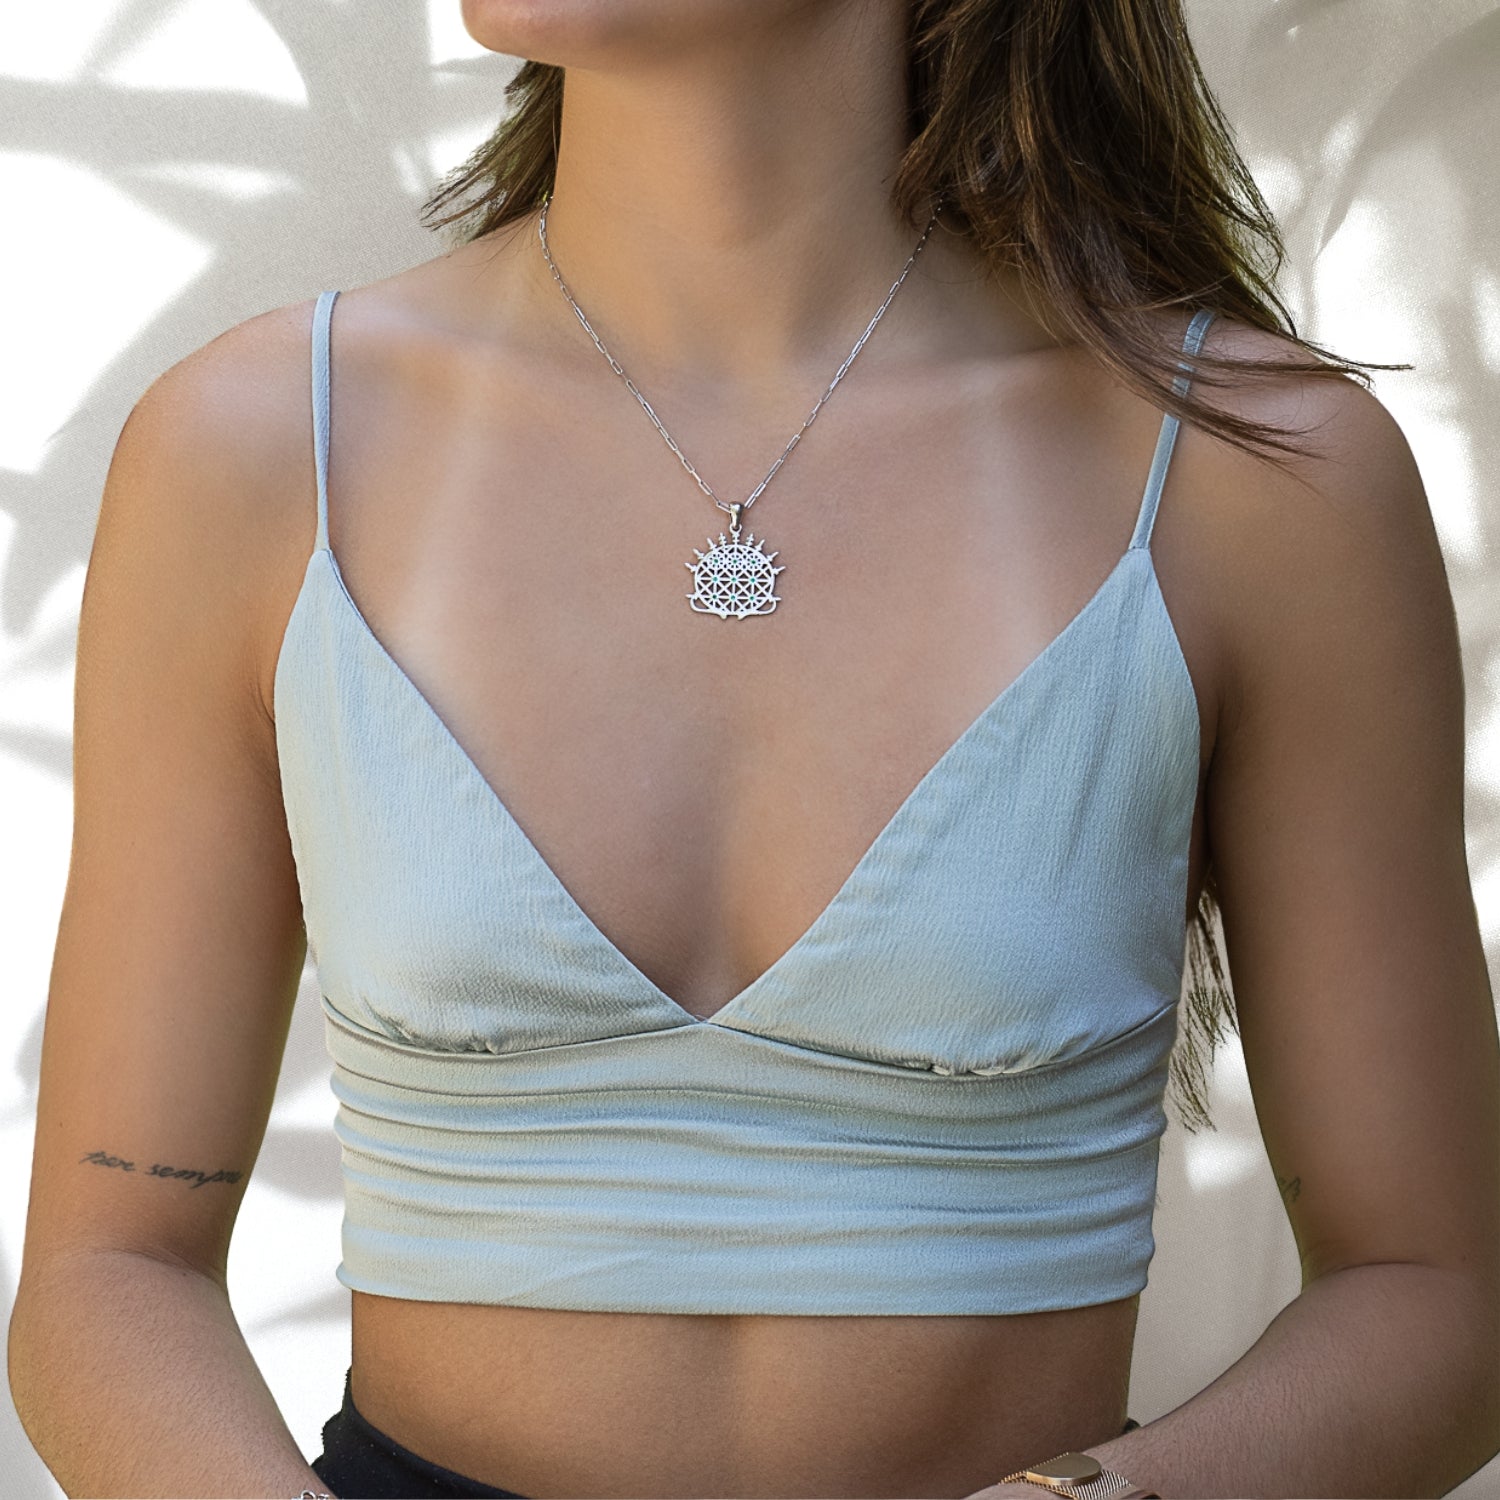 A model wearing the Silver Hittite Sun Disc Necklace, radiating with the positive energy and elegance of the jade or ruby stone.